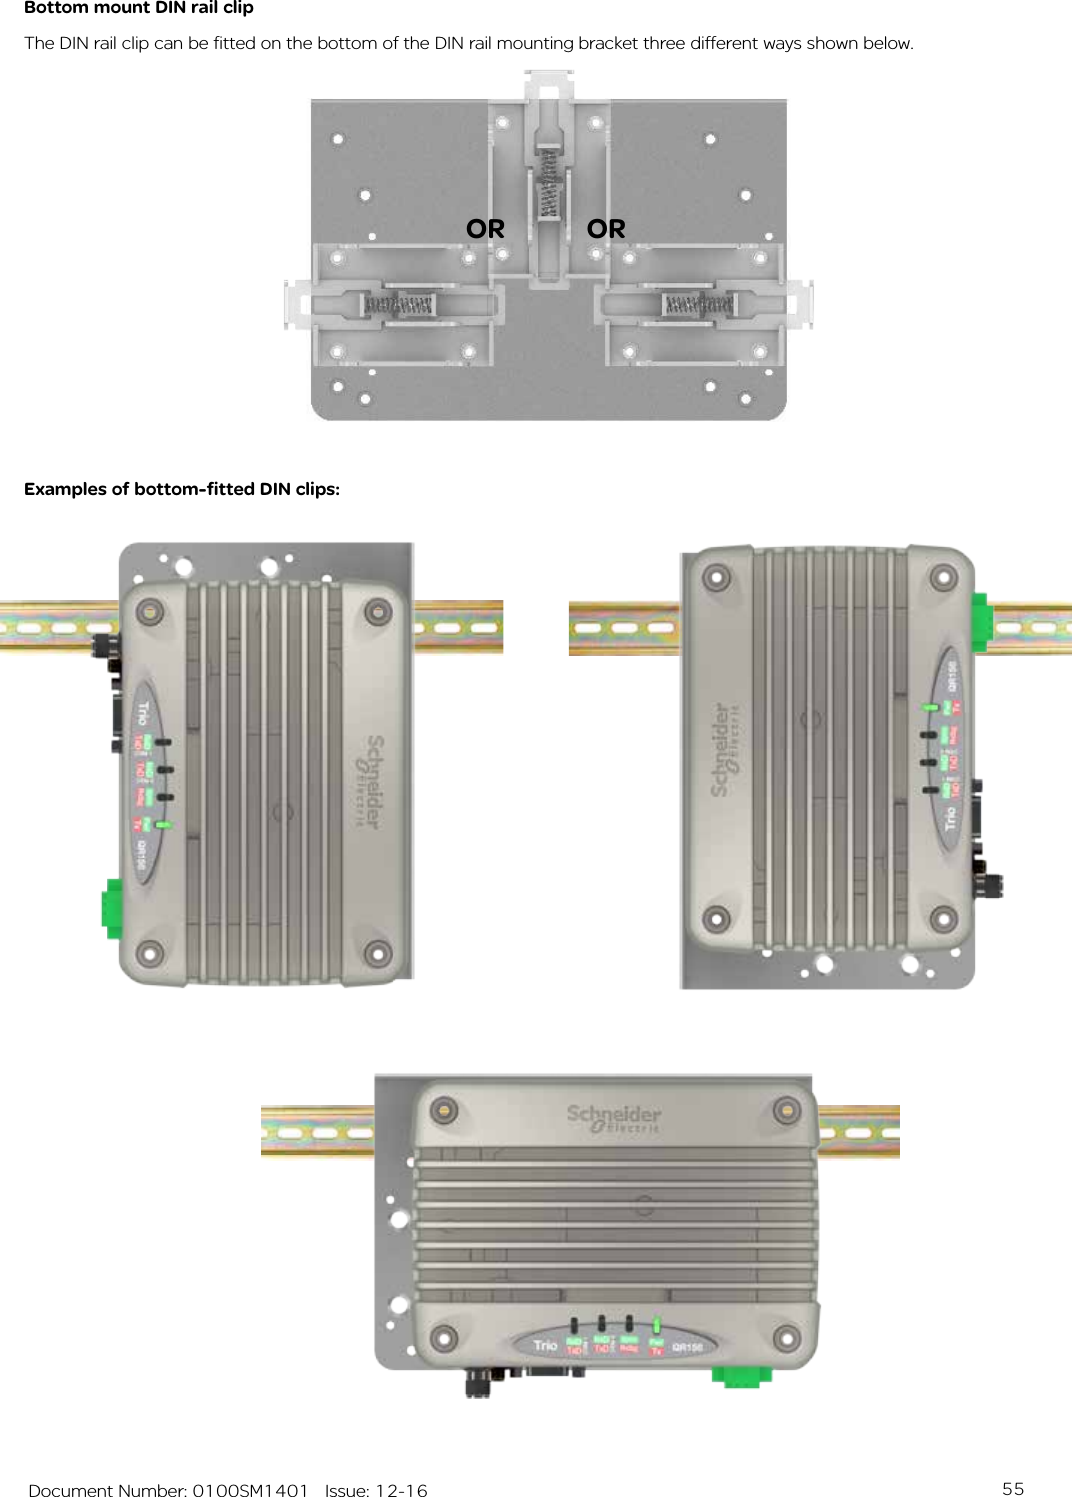 55   Document Number: 0100SM1401   Issue: 12-16Bottom mount DIN rail clipThe DIN rail clip can be fitted on the bottom of the DIN rail mounting bracket three different ways shown below.ORExamples of bottom-fitted DIN clips:OR